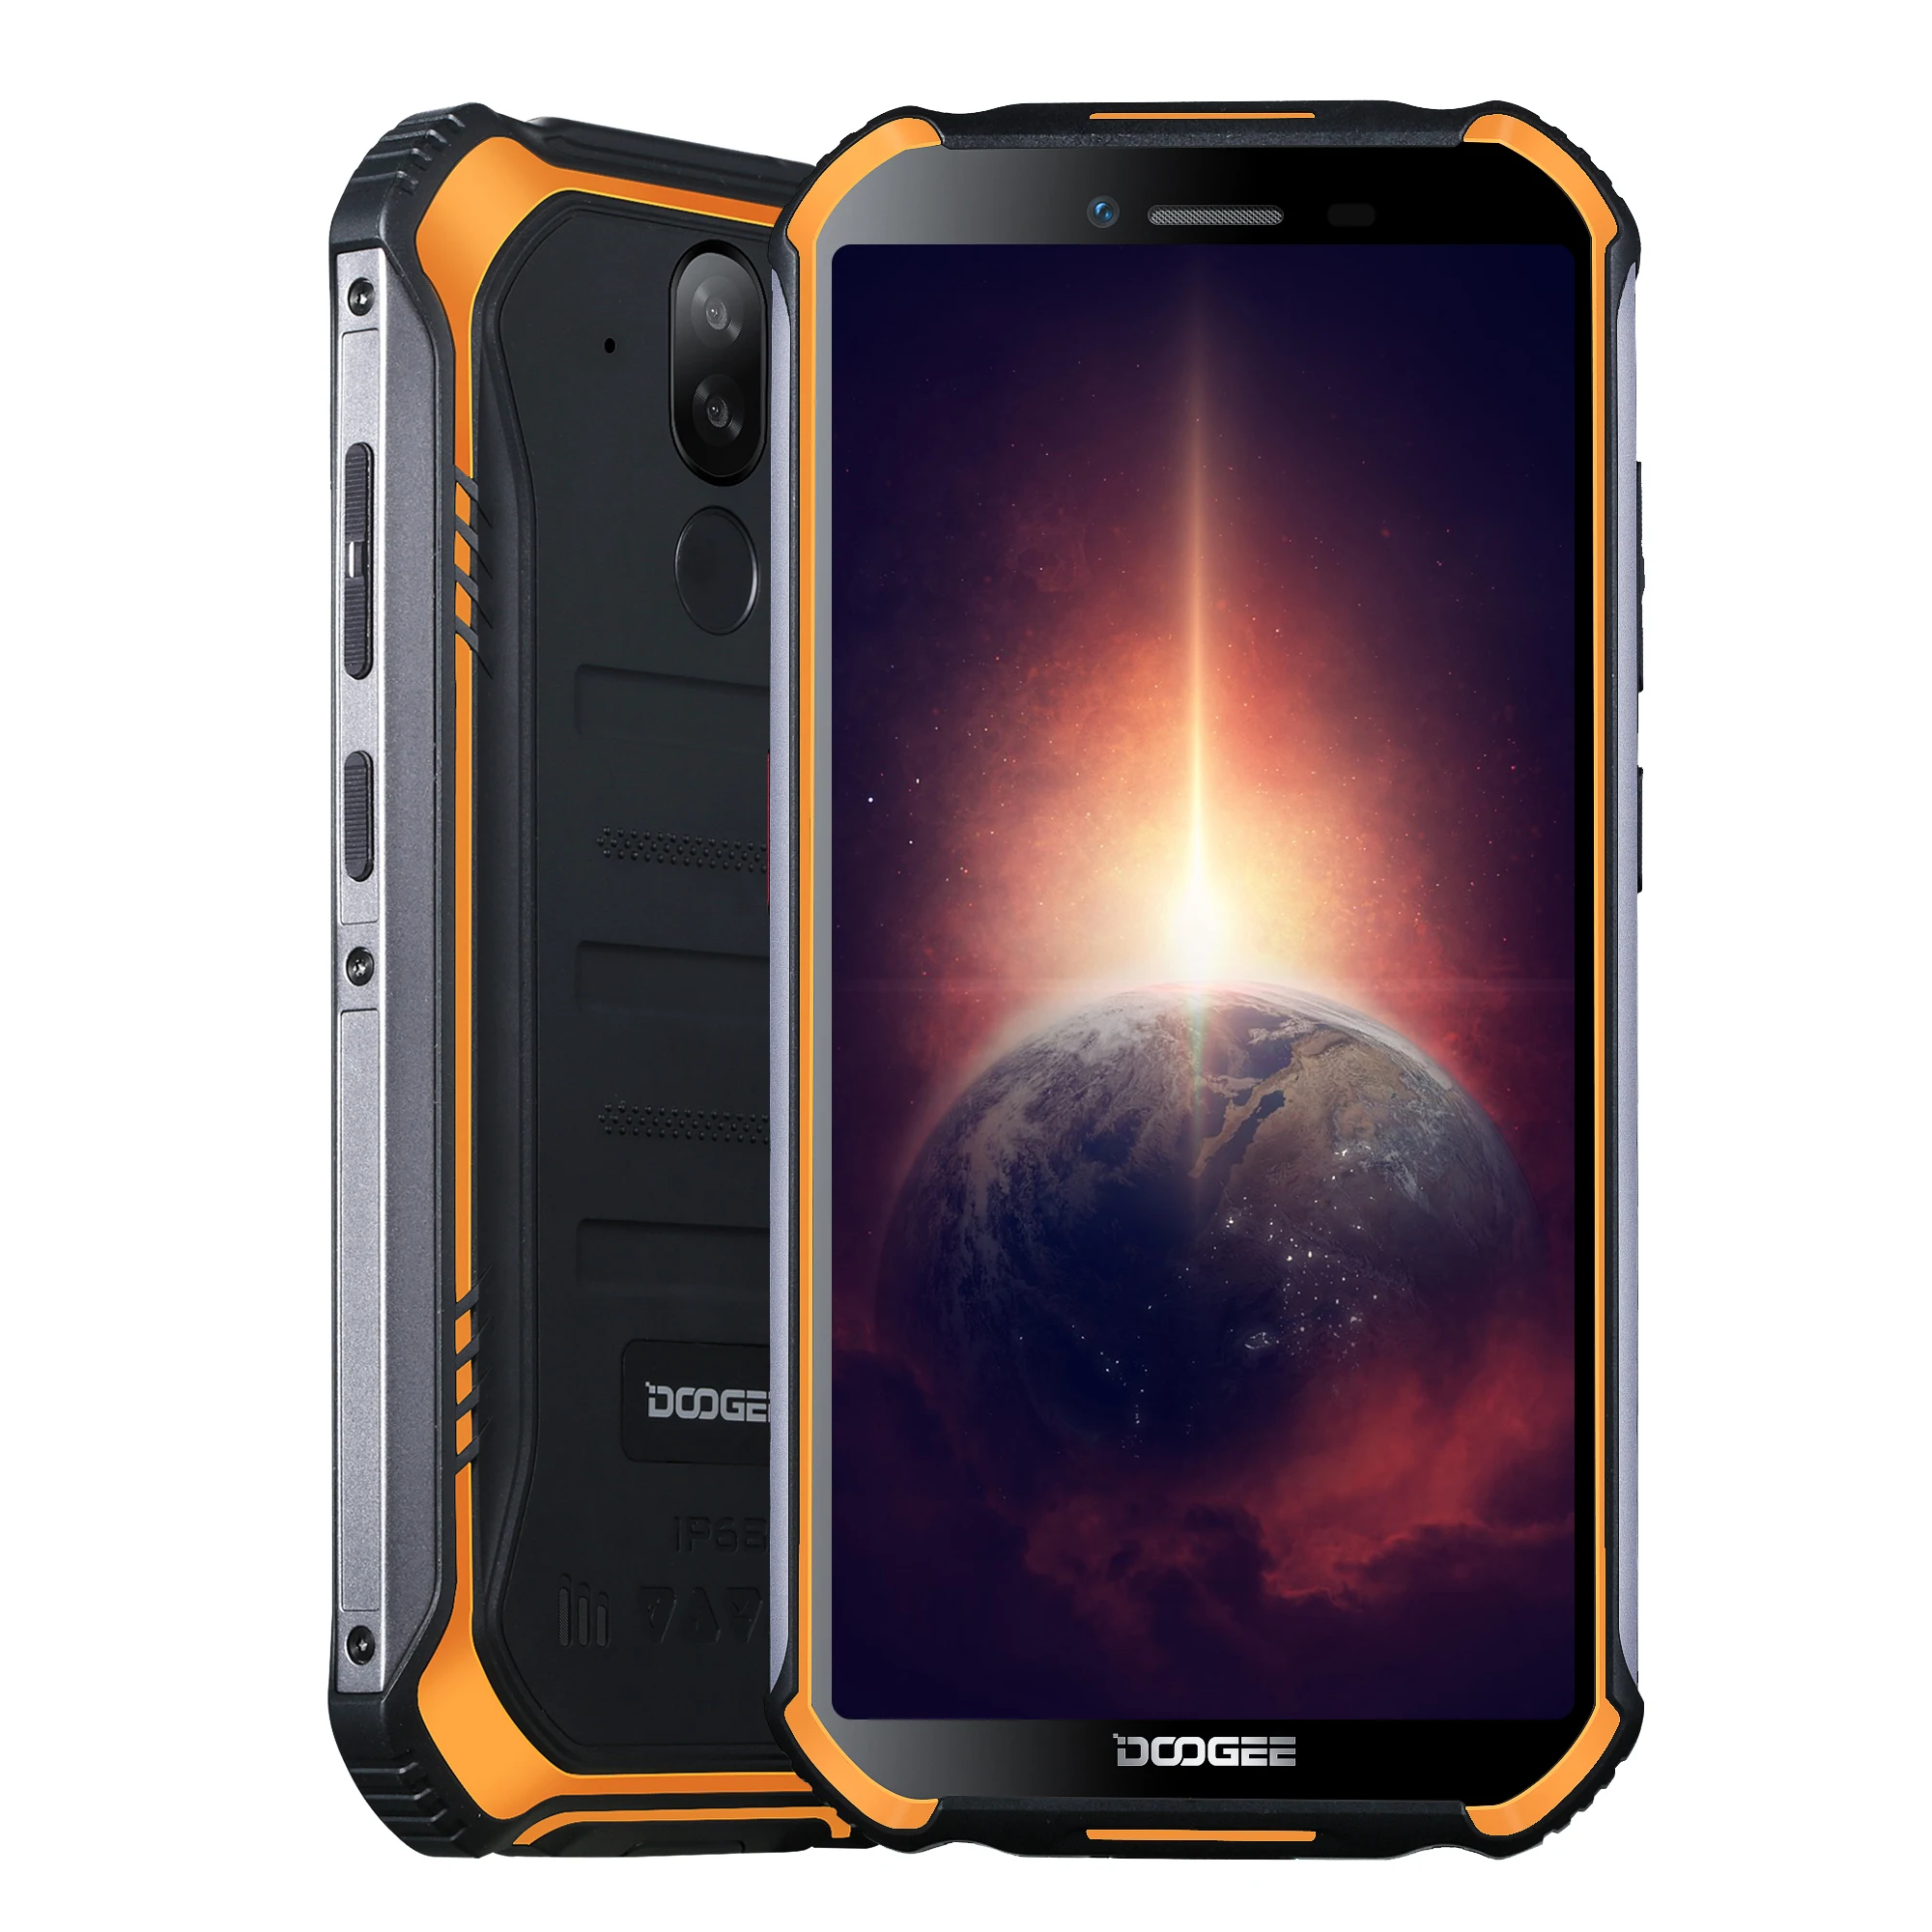 DOOGEE S40 Pro IP68/IP69K Rugged SmartPhone 5.45" NFC 4GB RAM 64GB ROM Helio A25 Octa Core Android 10 4650mAh 13MP Mobile Phone